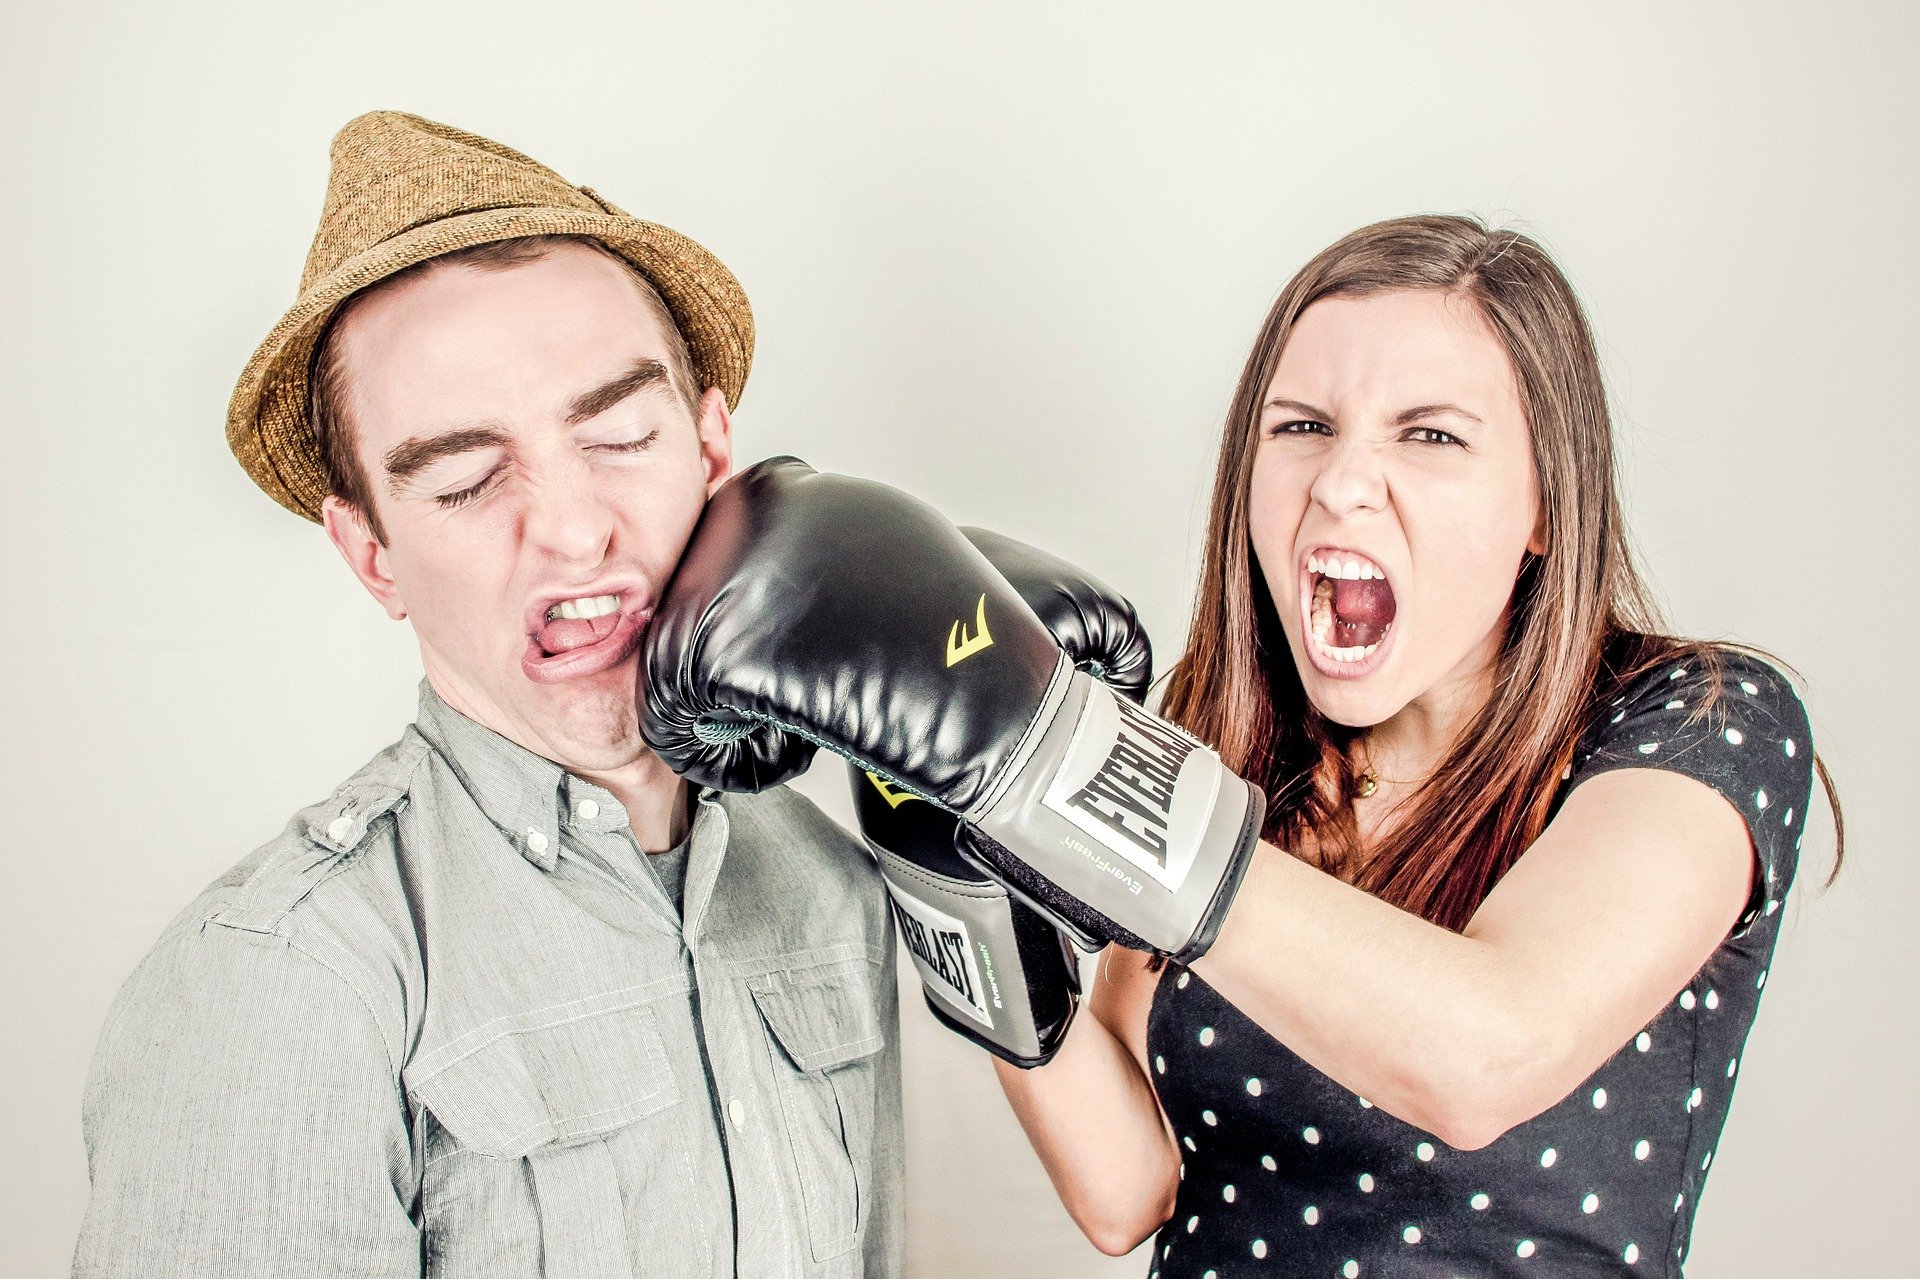 Conflict management at workplace